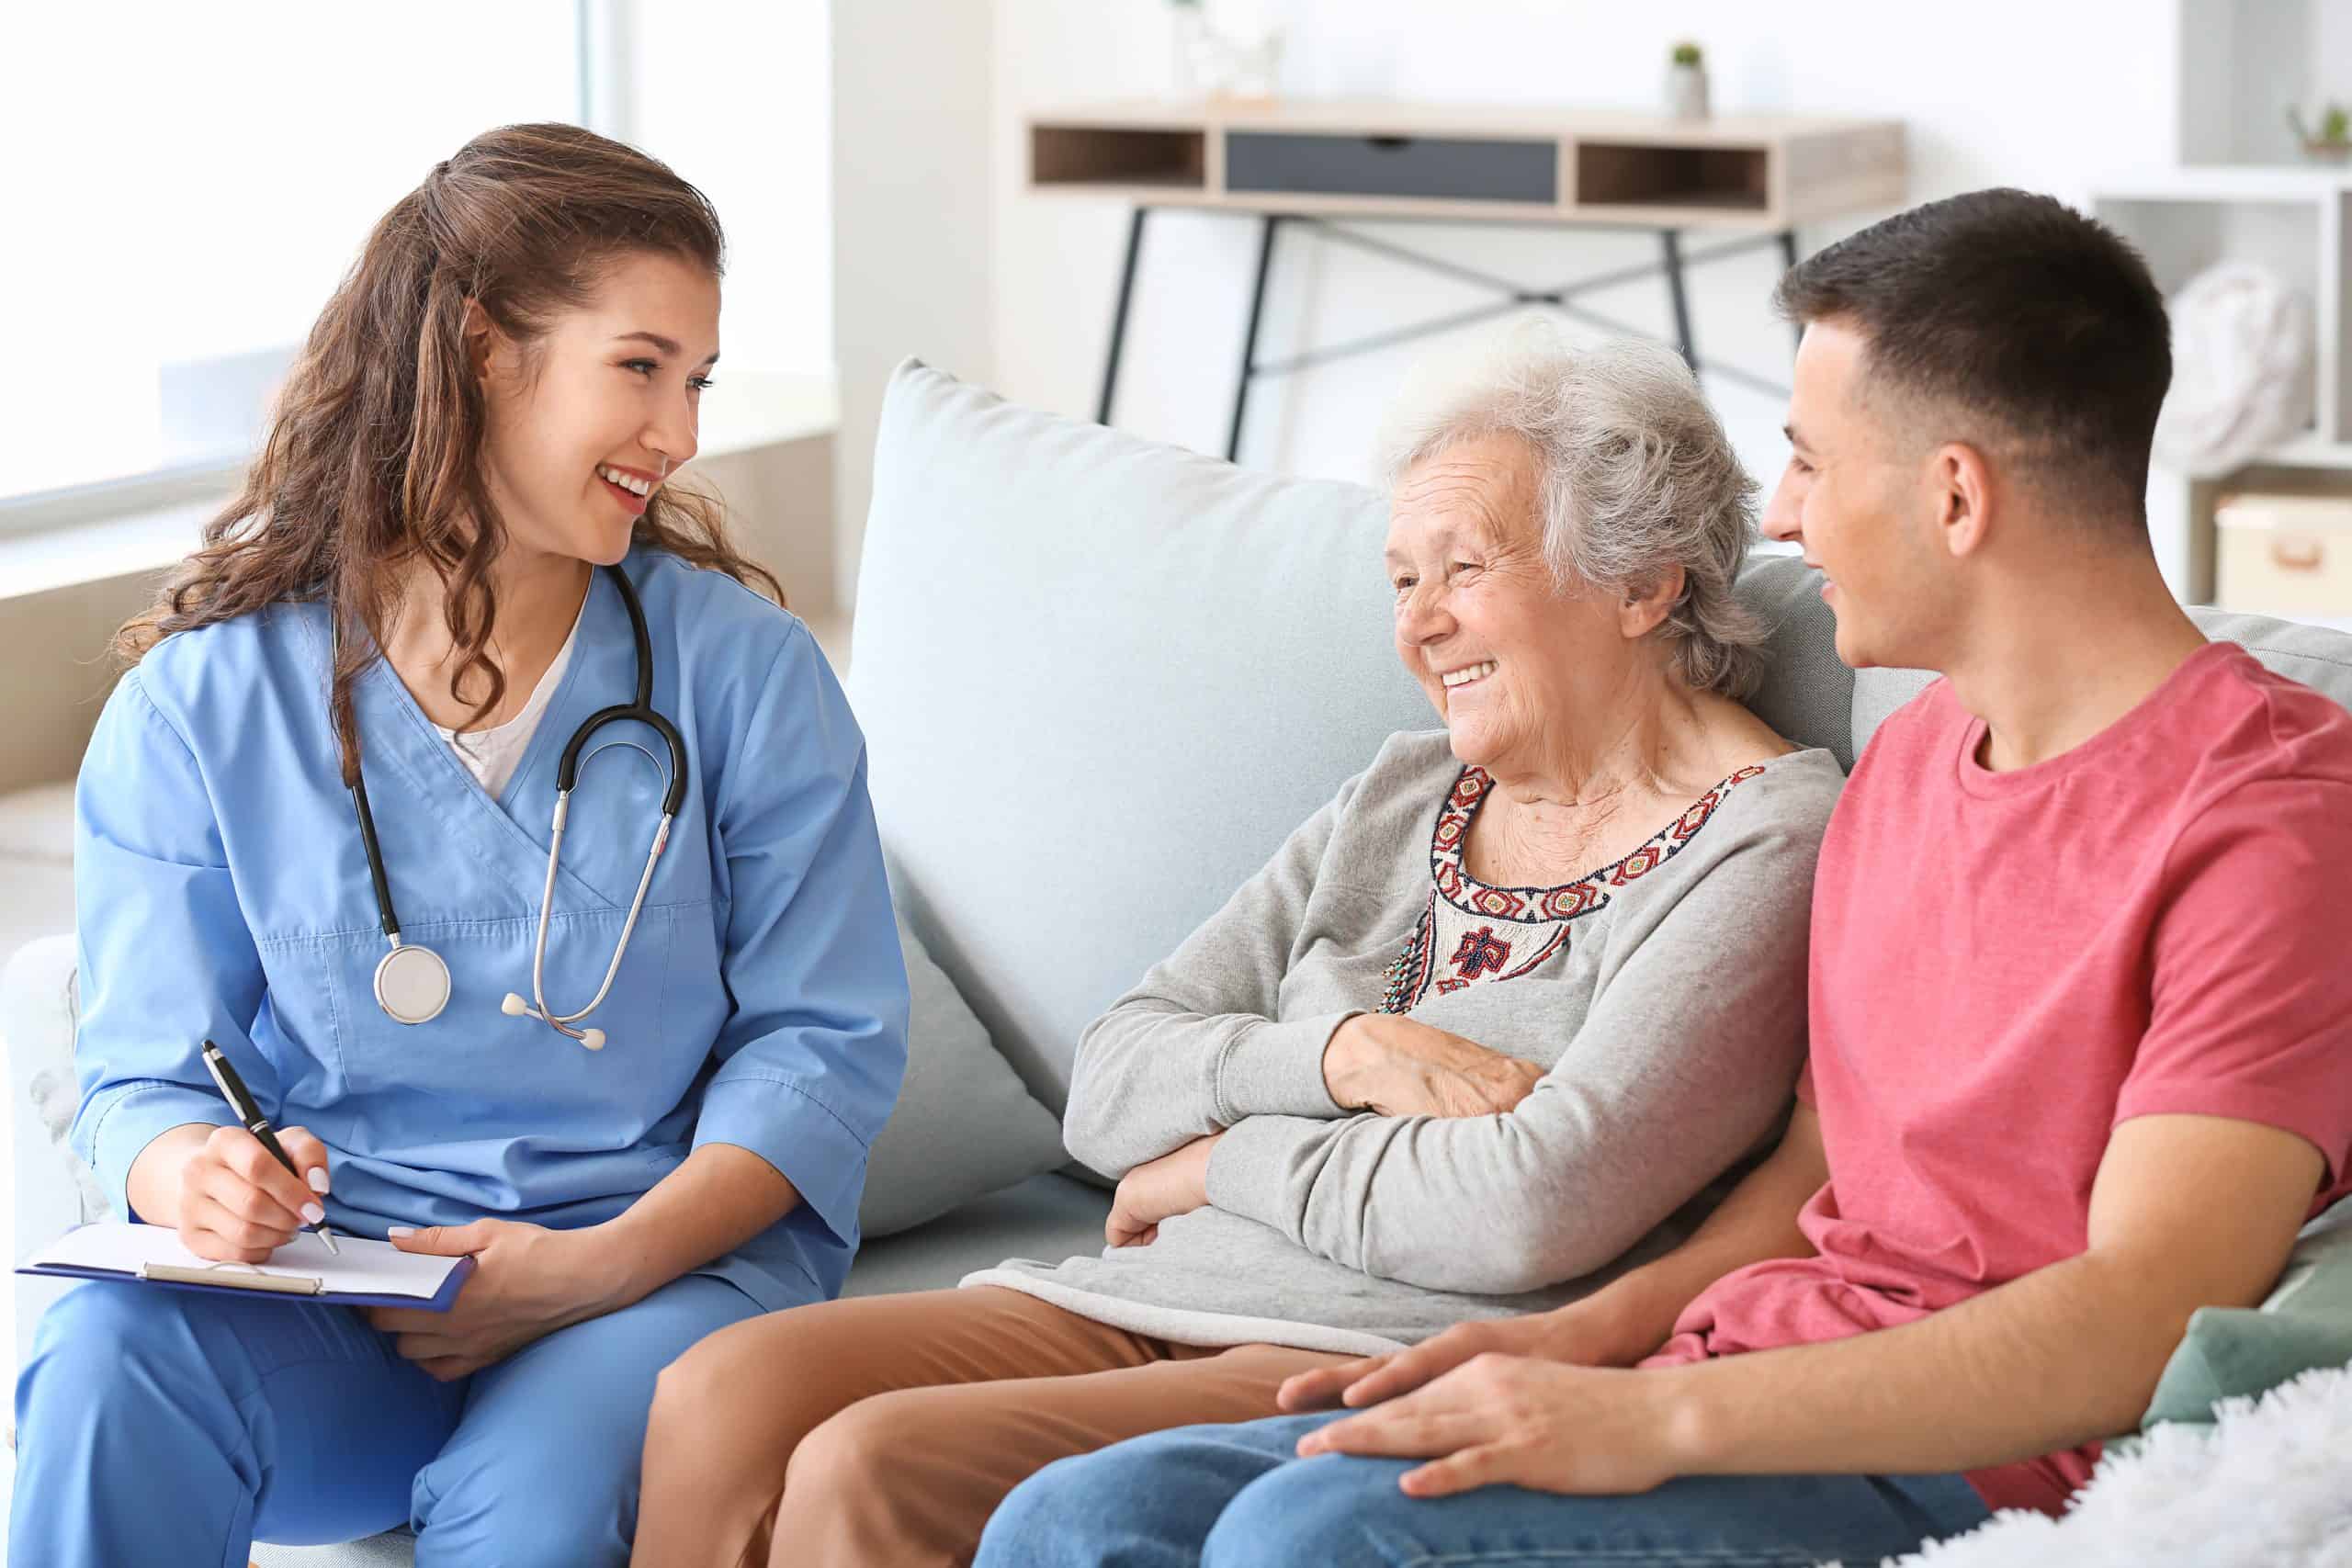 11 Questions to Ask When Choosing a Nursing Home